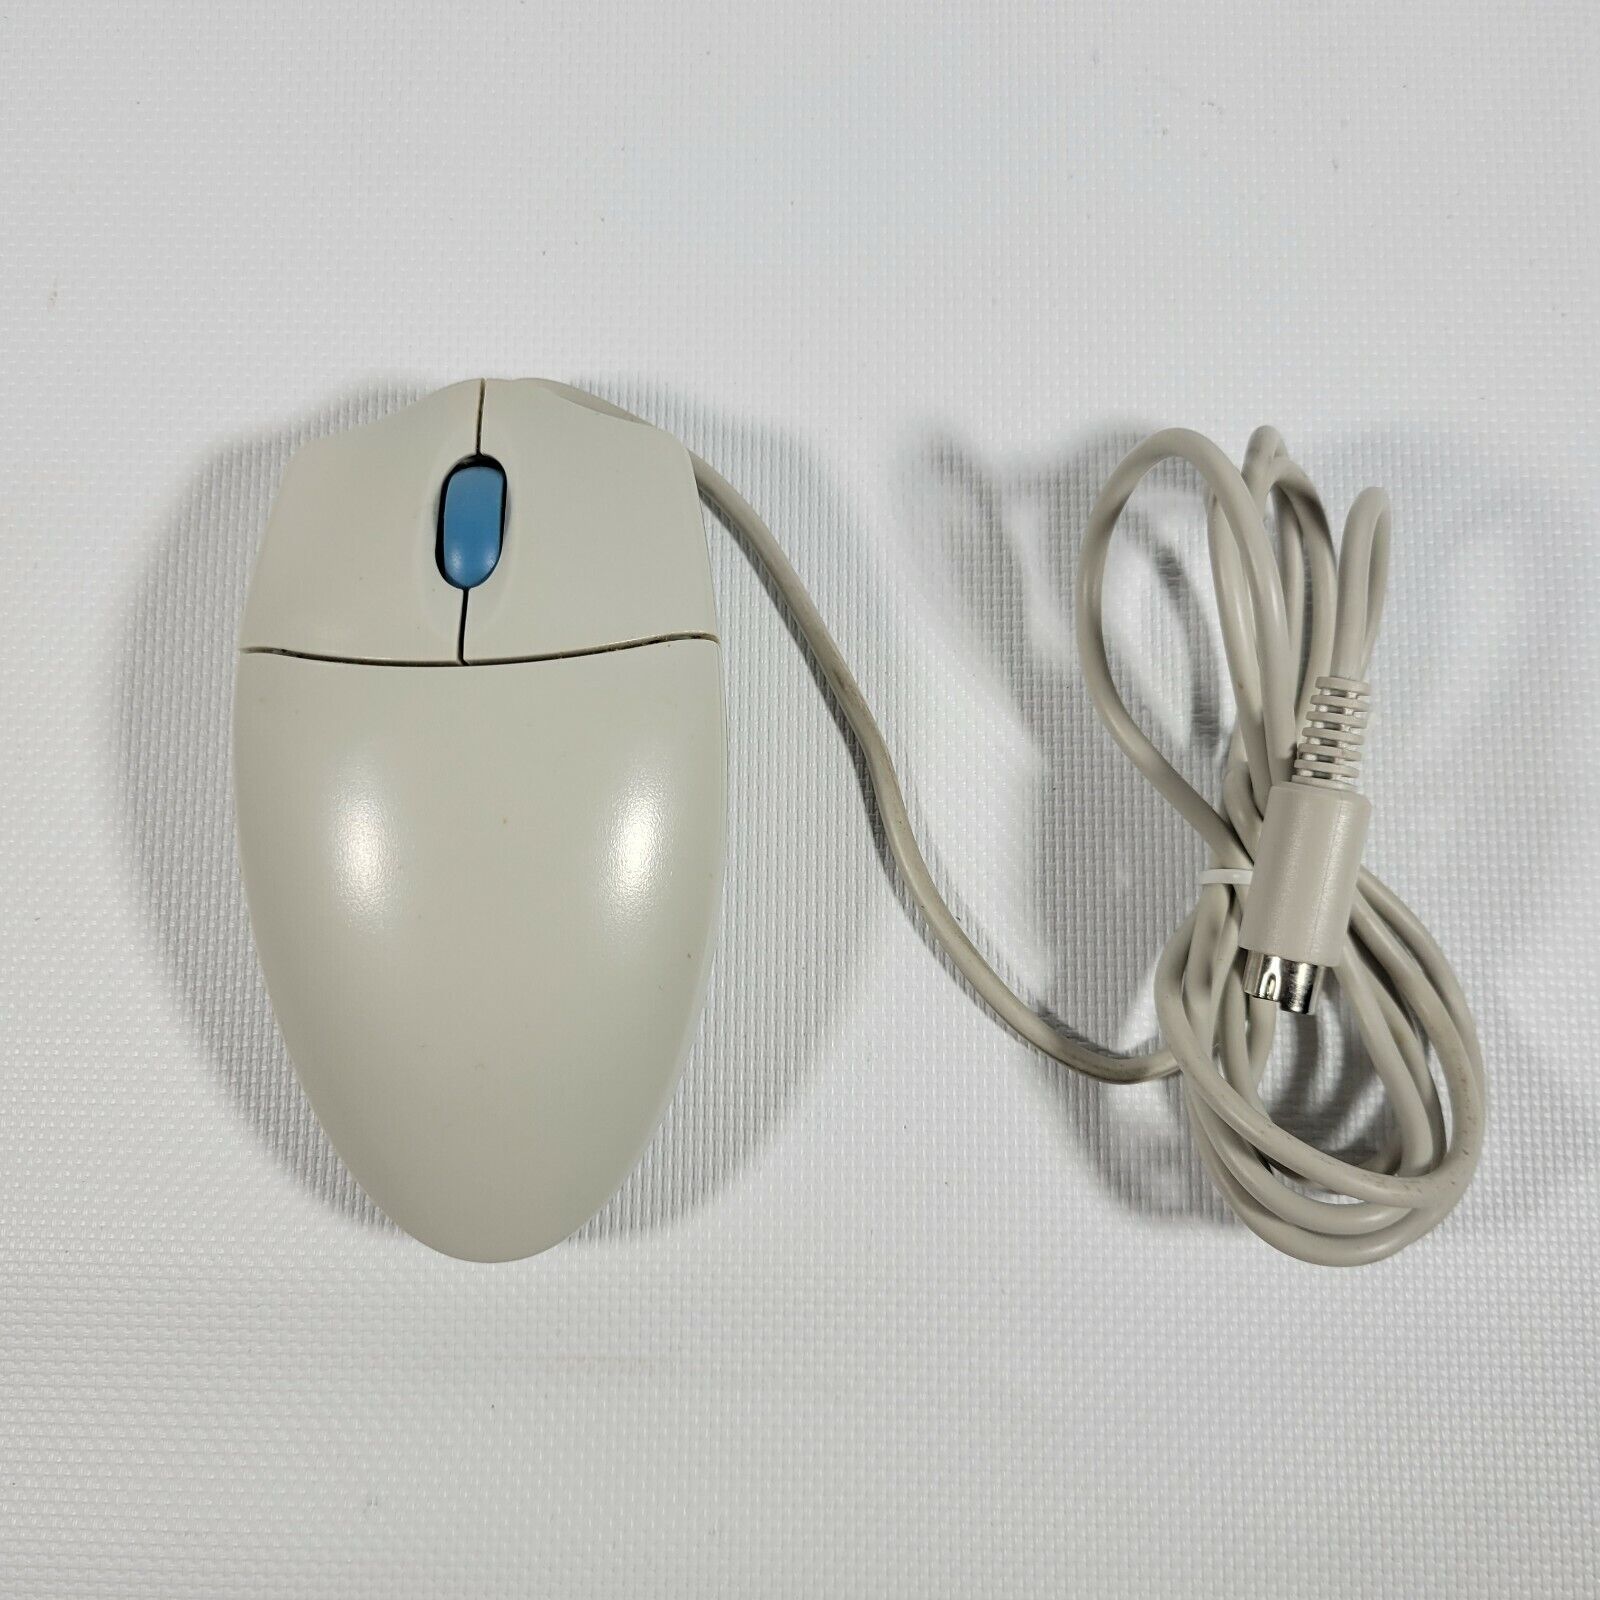 VINTAGE  PS2 CORDED PS/2 Mouse 3 Button Scroll Wheel Track ball Rare 